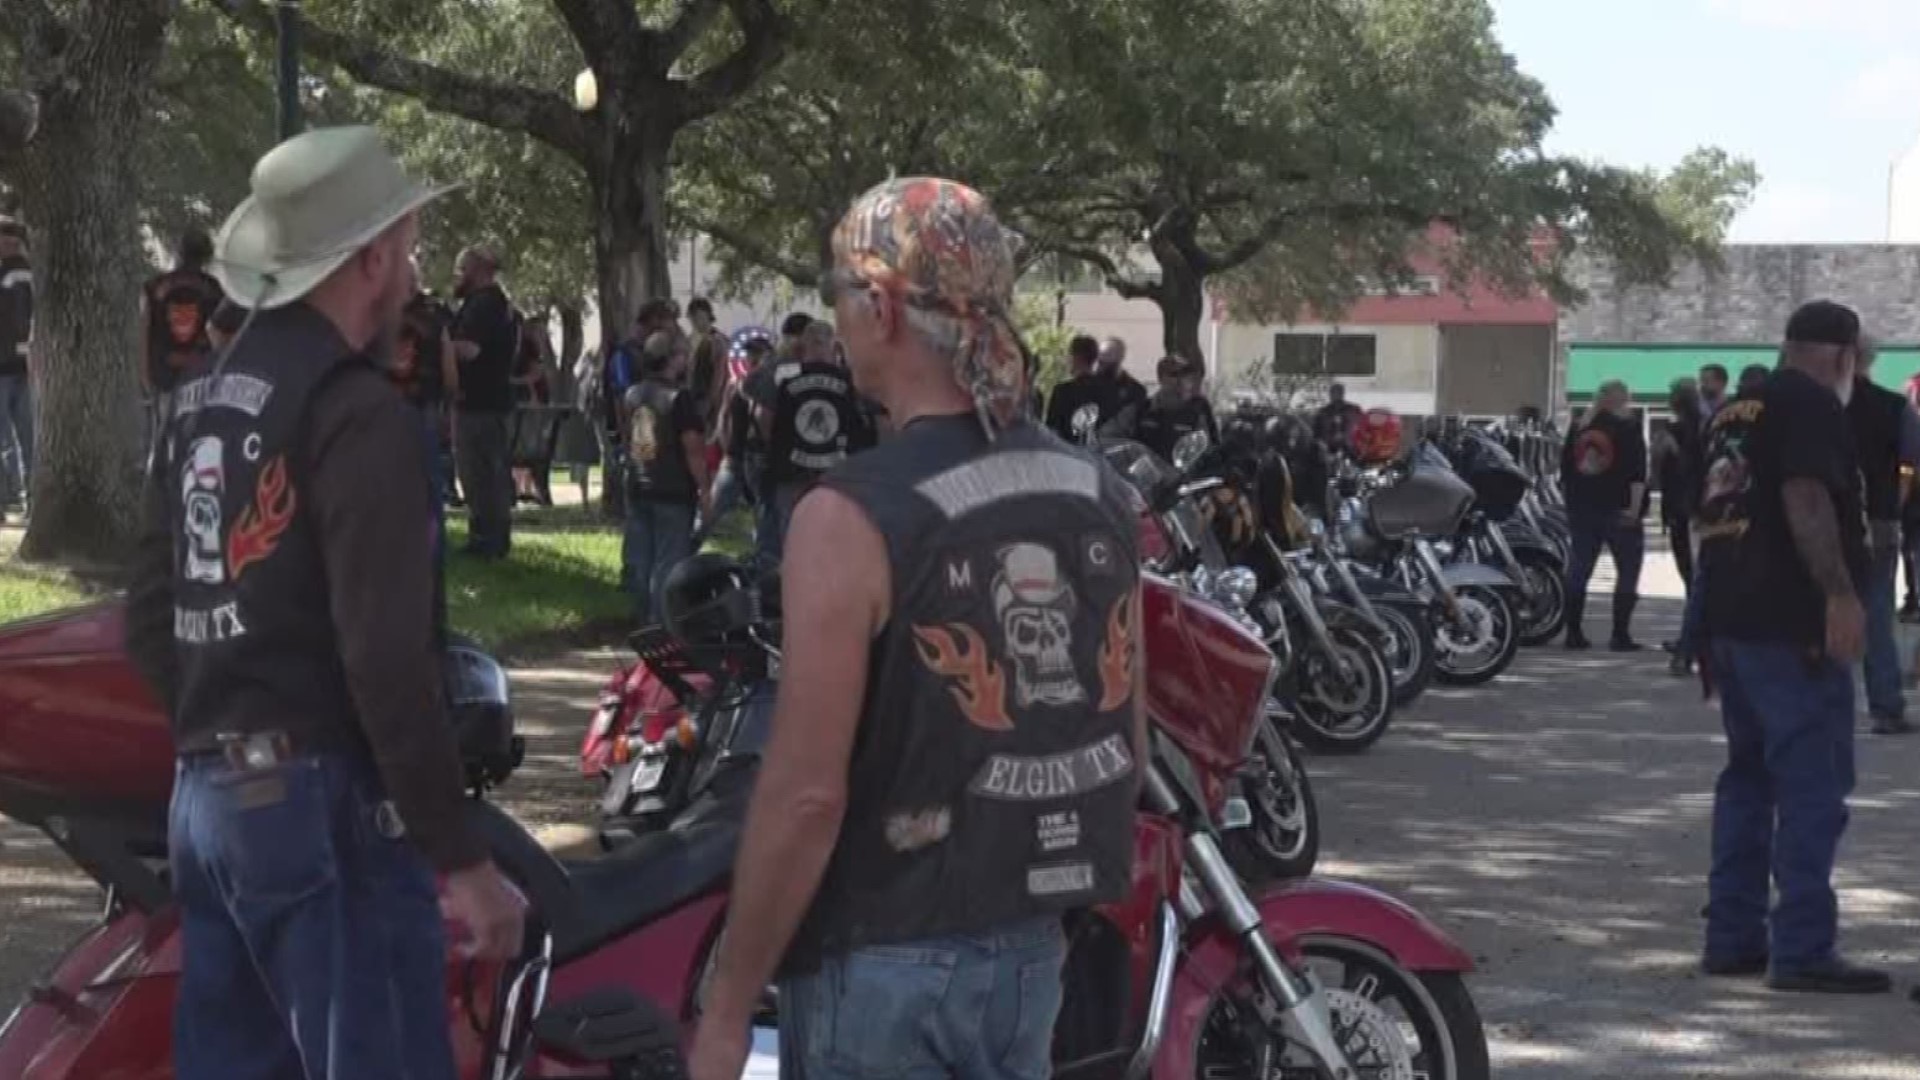 A group of local bikers said they are taking political action against biker profiling.